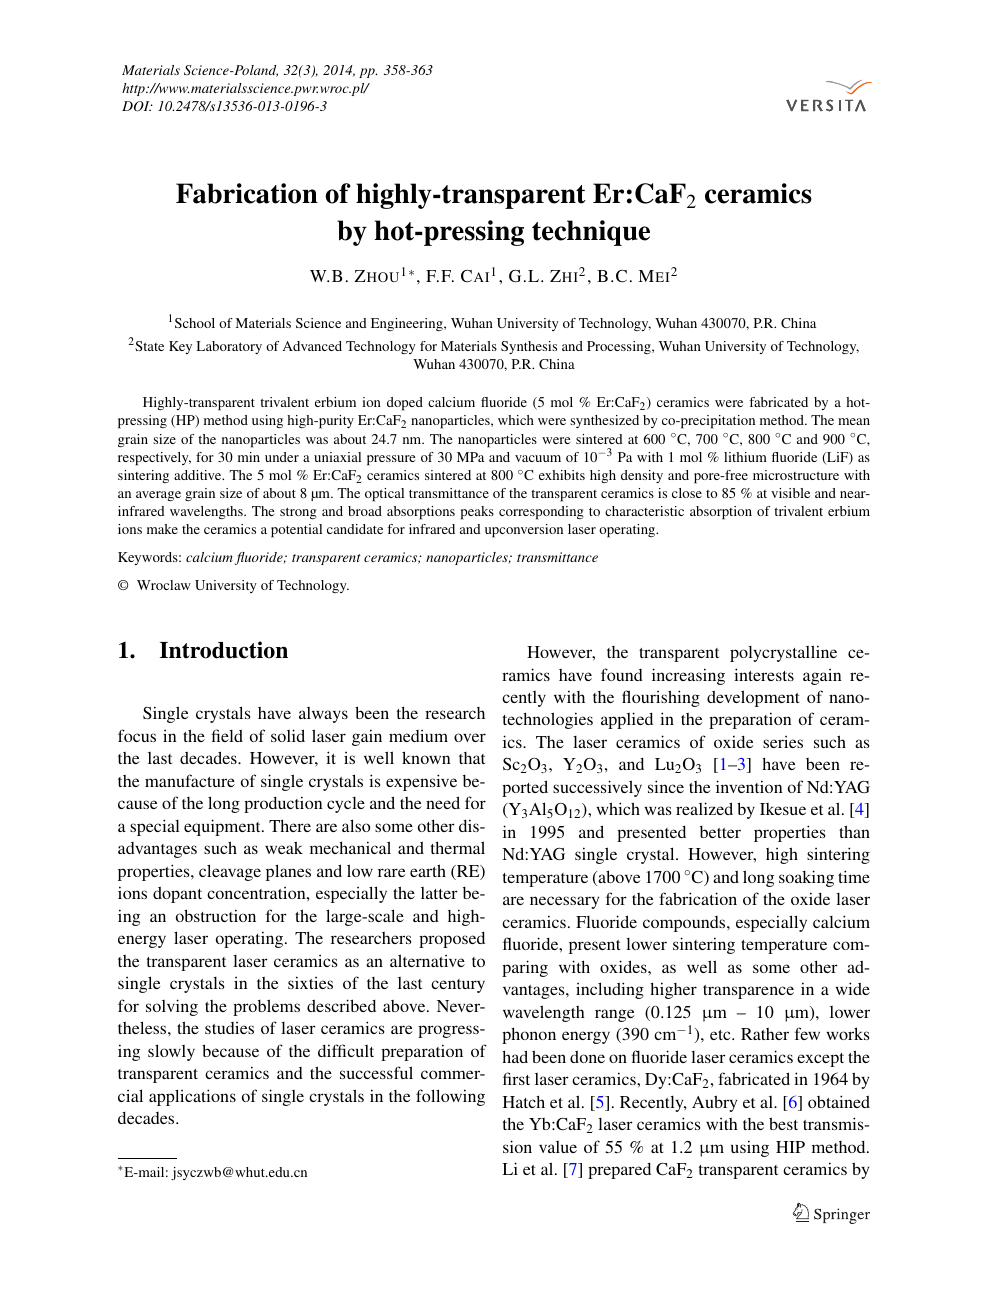 Fabrication Of Highly Transparent Er Caf2 Ceramics By Hot Pressing Technique Topic Of Research Paper In Materials Engineering Download Scholarly Article Pdf And Read For Free On Cyberleninka Open Science Hub